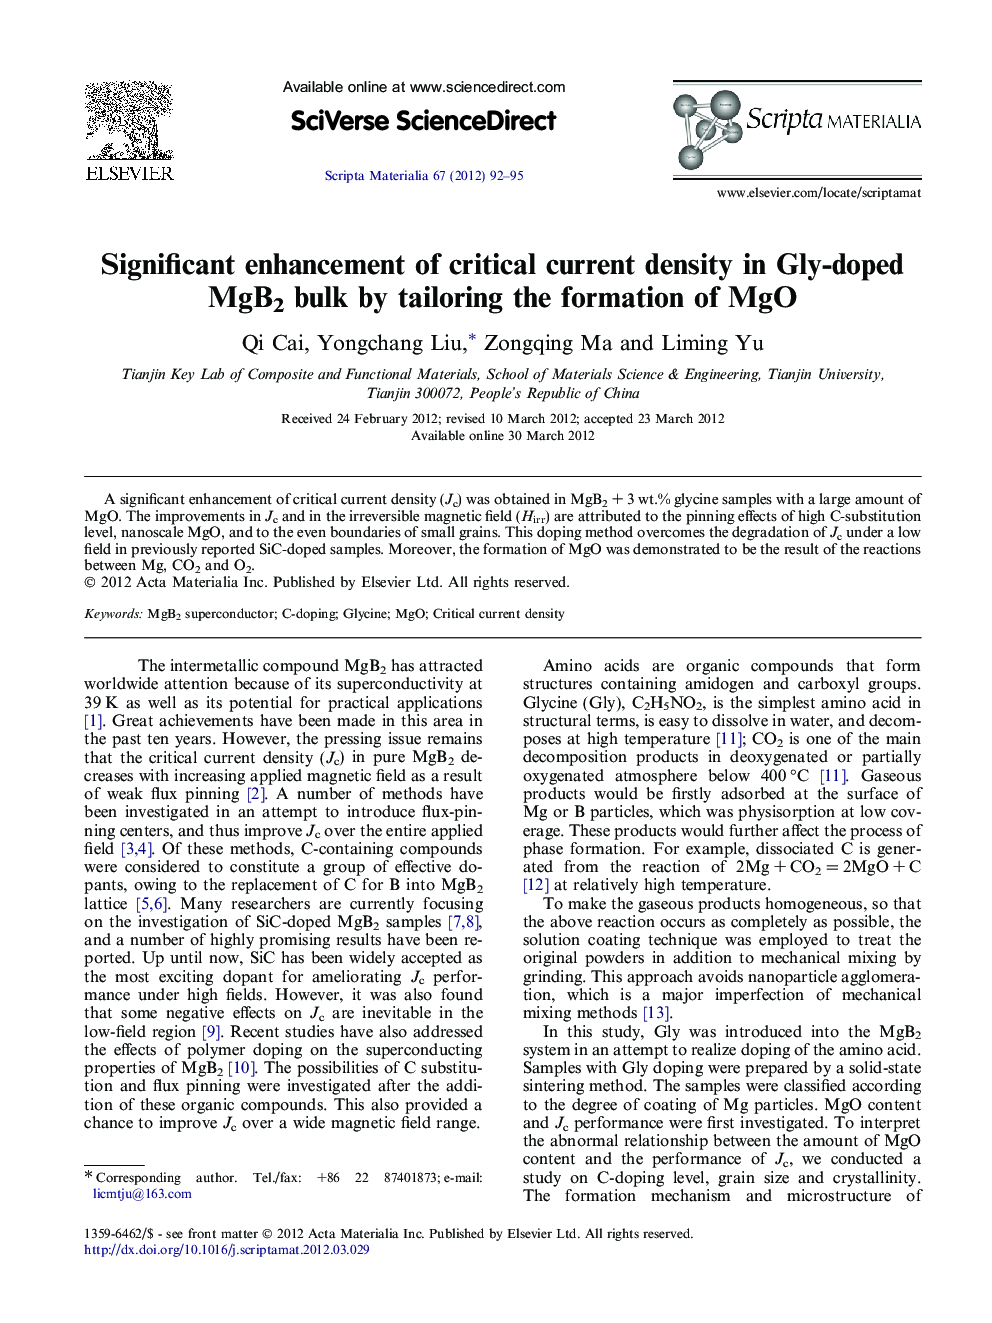 Significant enhancement of critical current density in Gly-doped MgB2 bulk by tailoring the formation of MgO